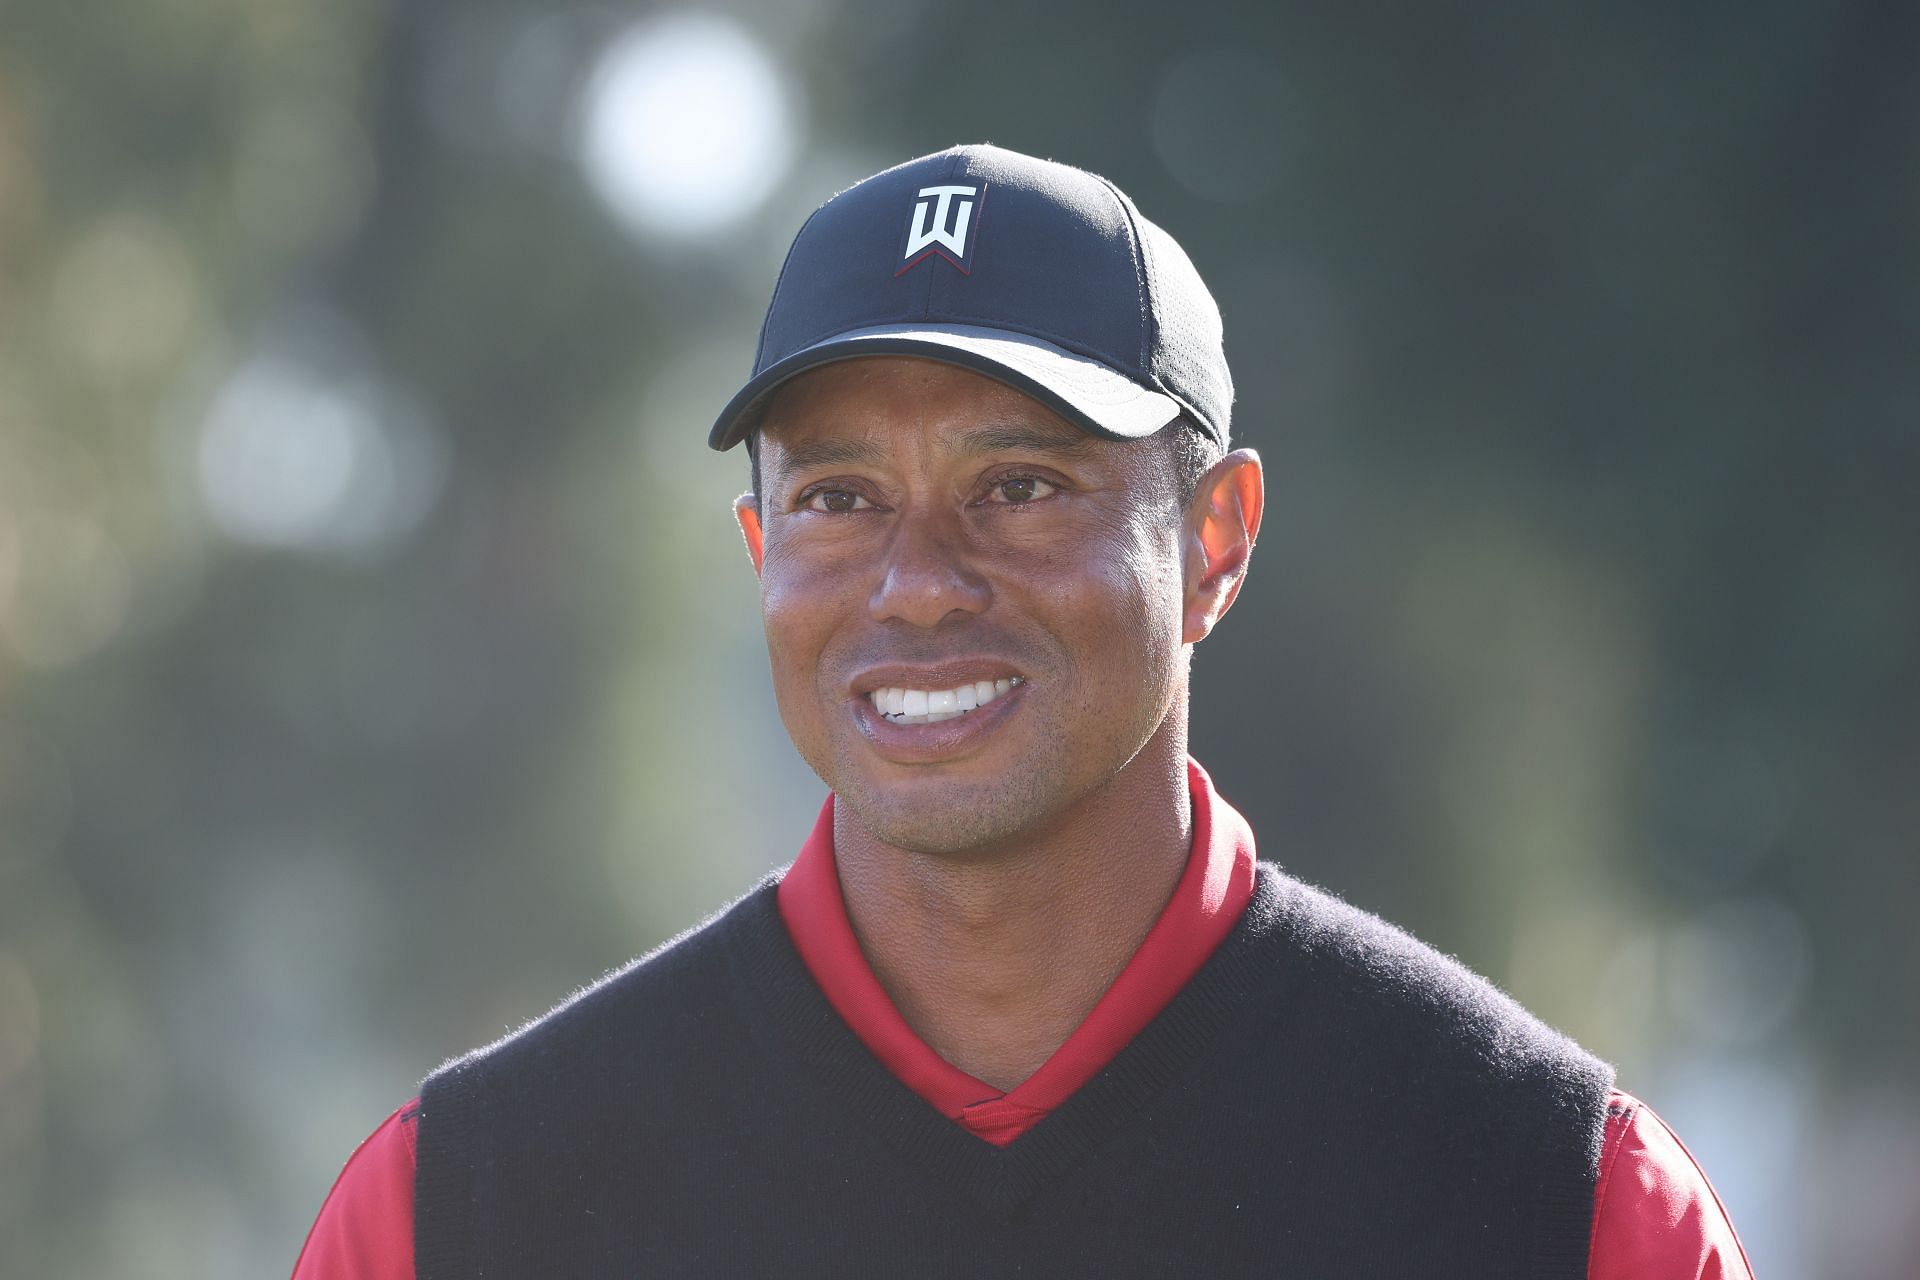 Previous winners like Tiger Woods get automatic entry into the Masters